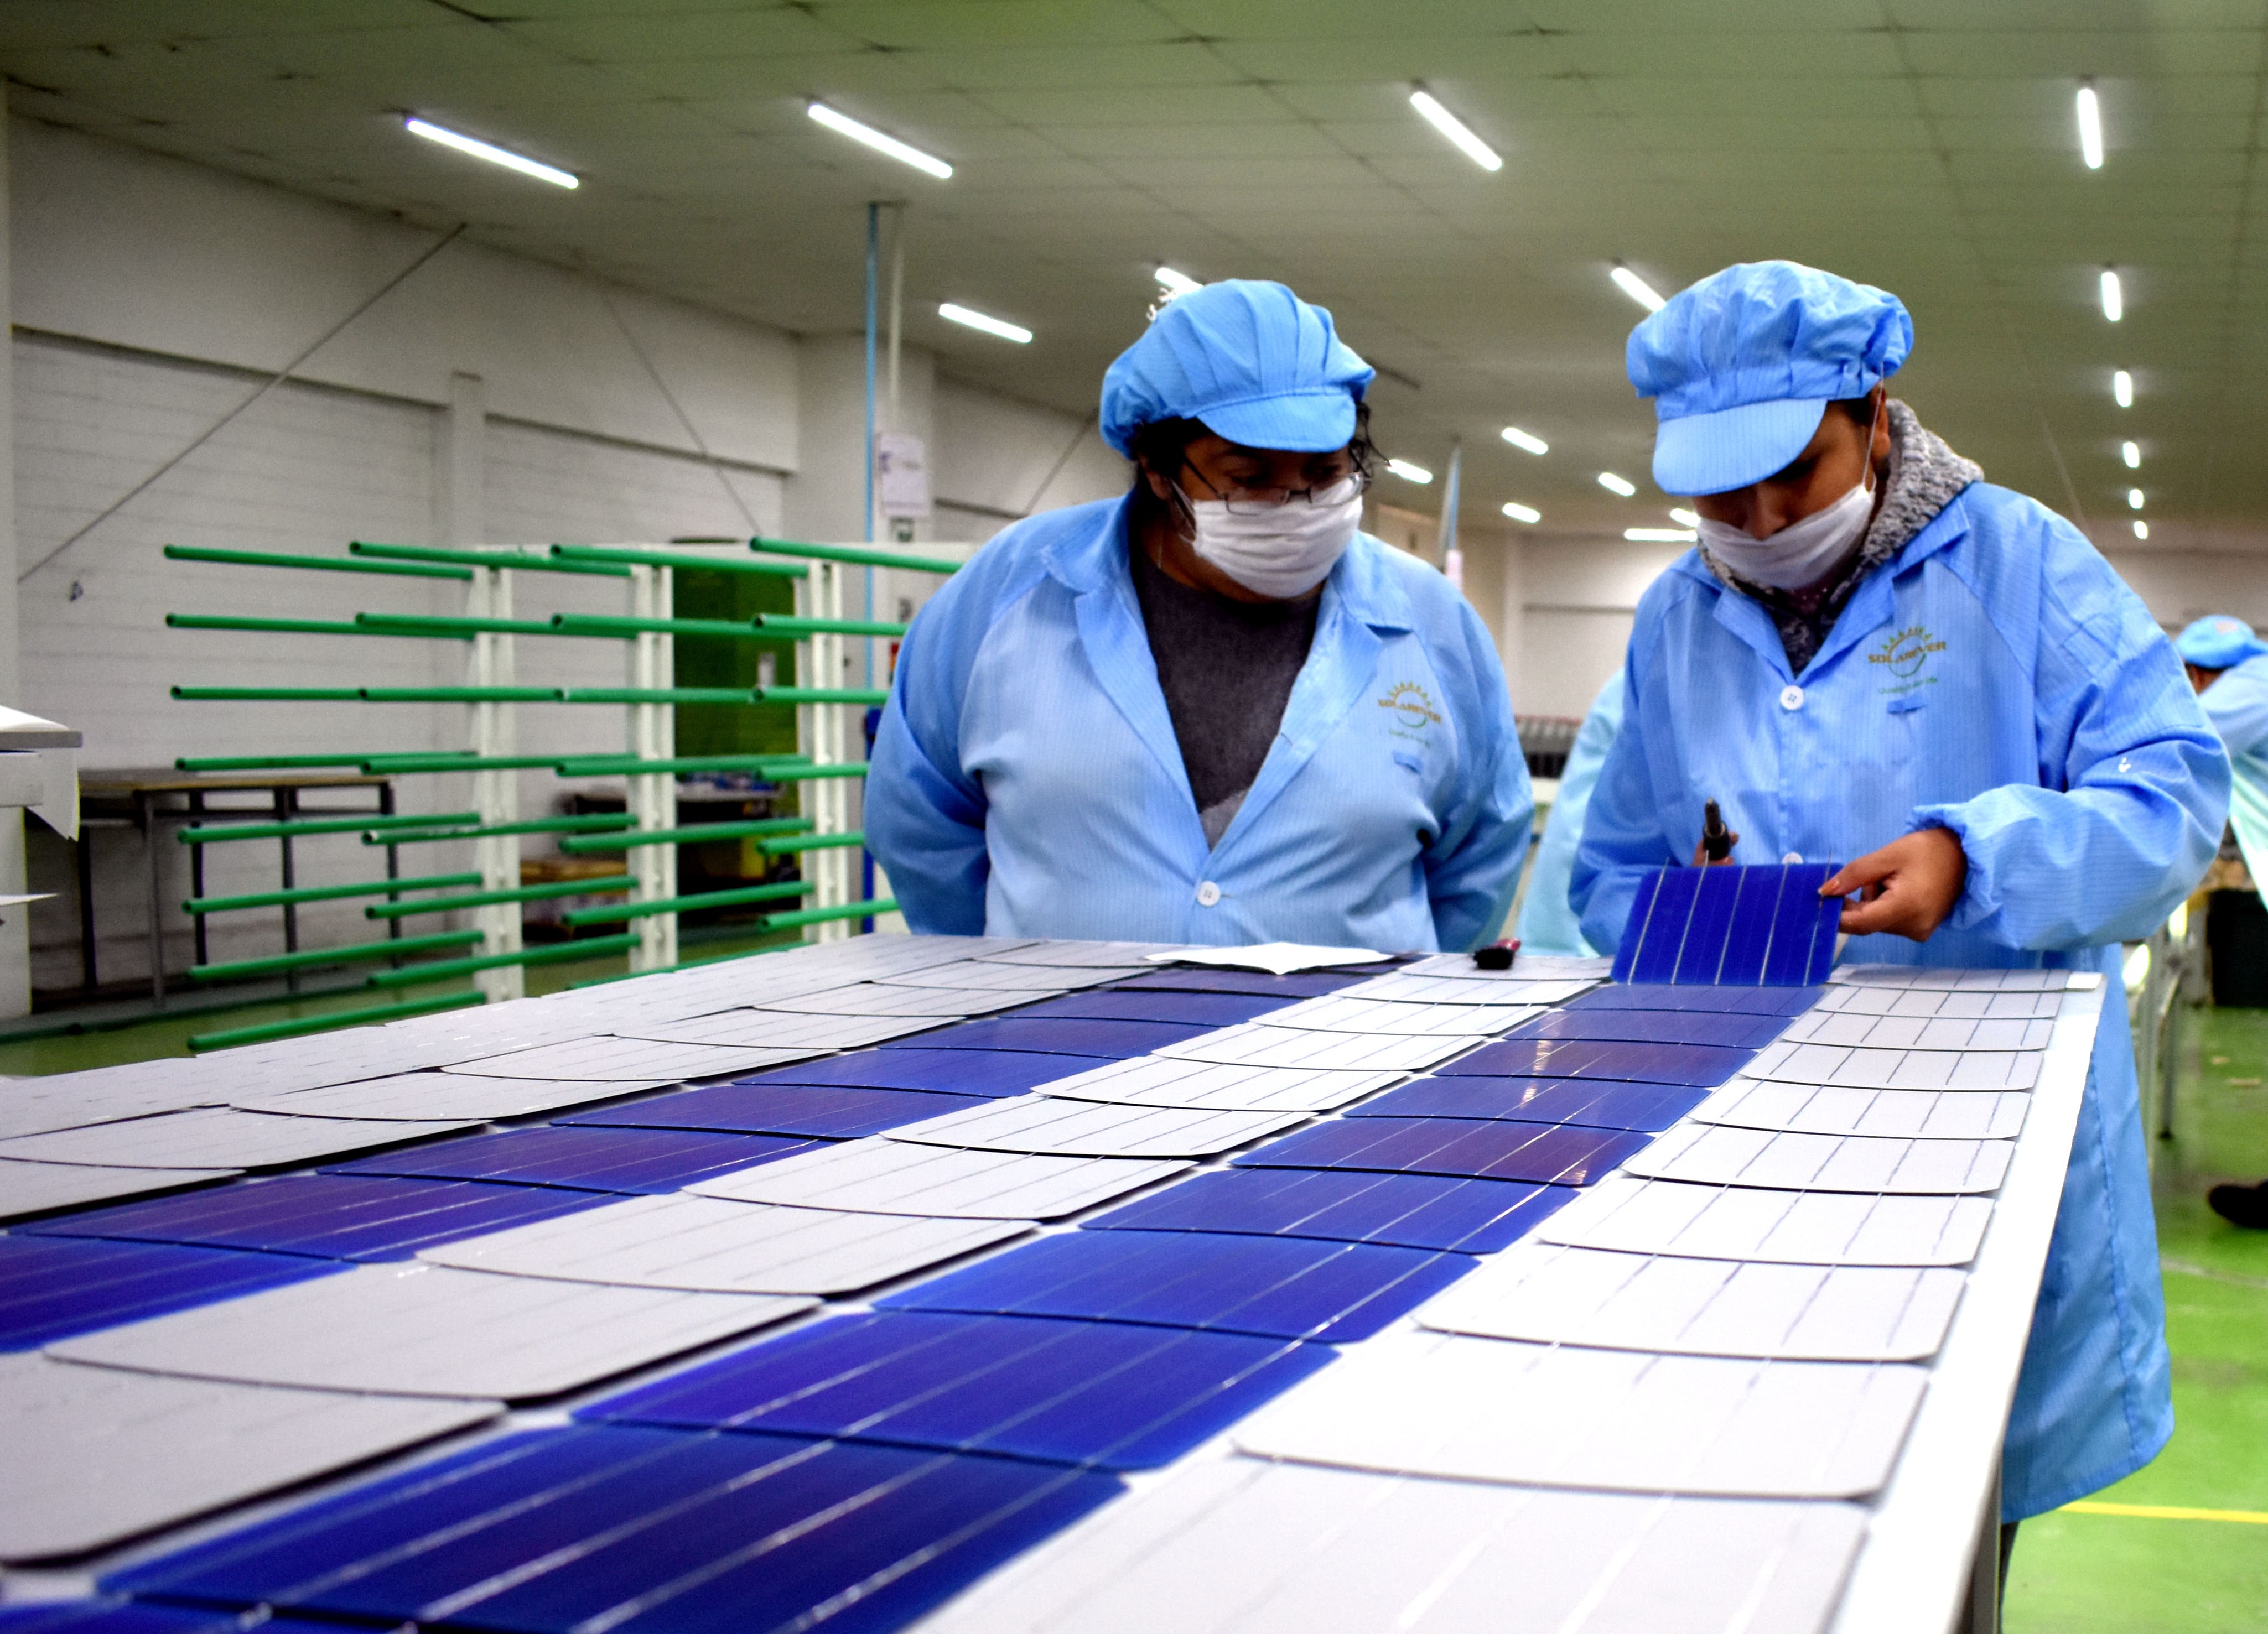 Solarever inaugurates the largest solar panel plant in the country; had an investment of 20 million dollars